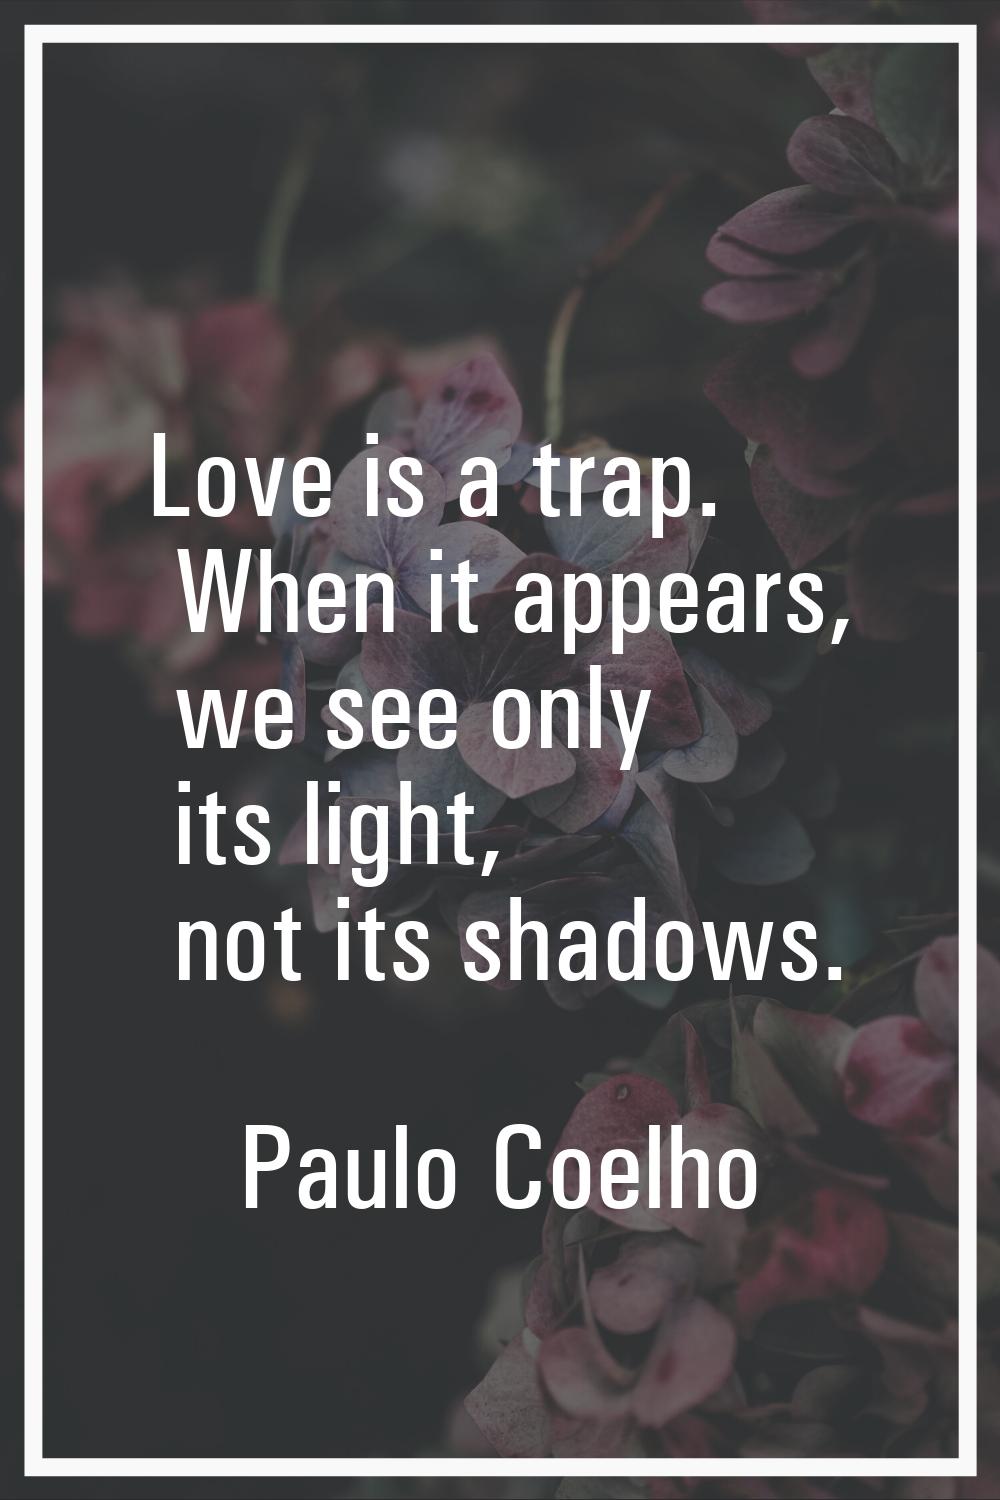 Love is a trap. When it appears, we see only its light, not its shadows.